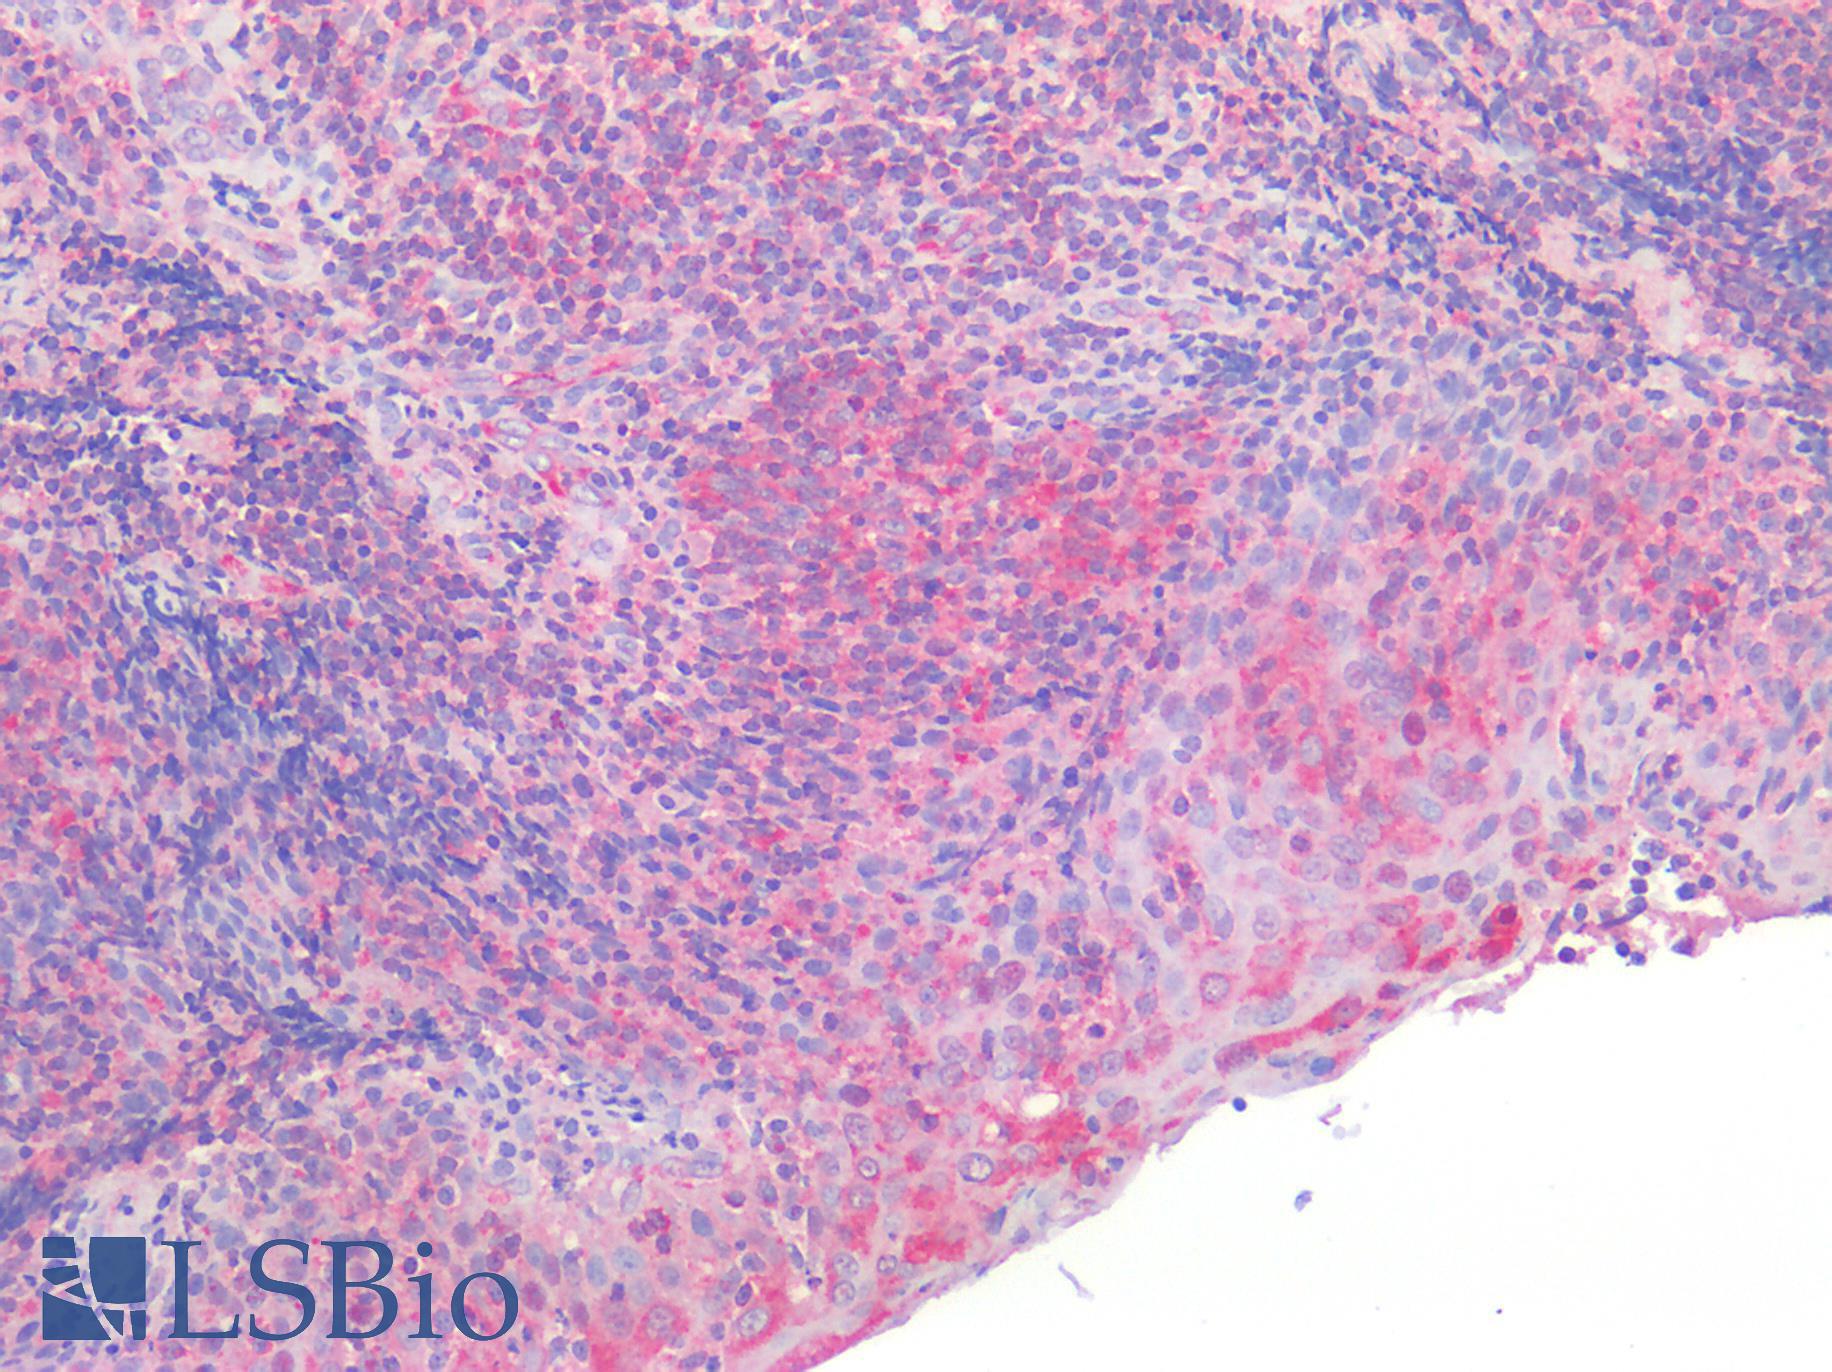 CYLD Antibody - Human Tonsil: Formalin-Fixed, Paraffin-Embedded (FFPE)